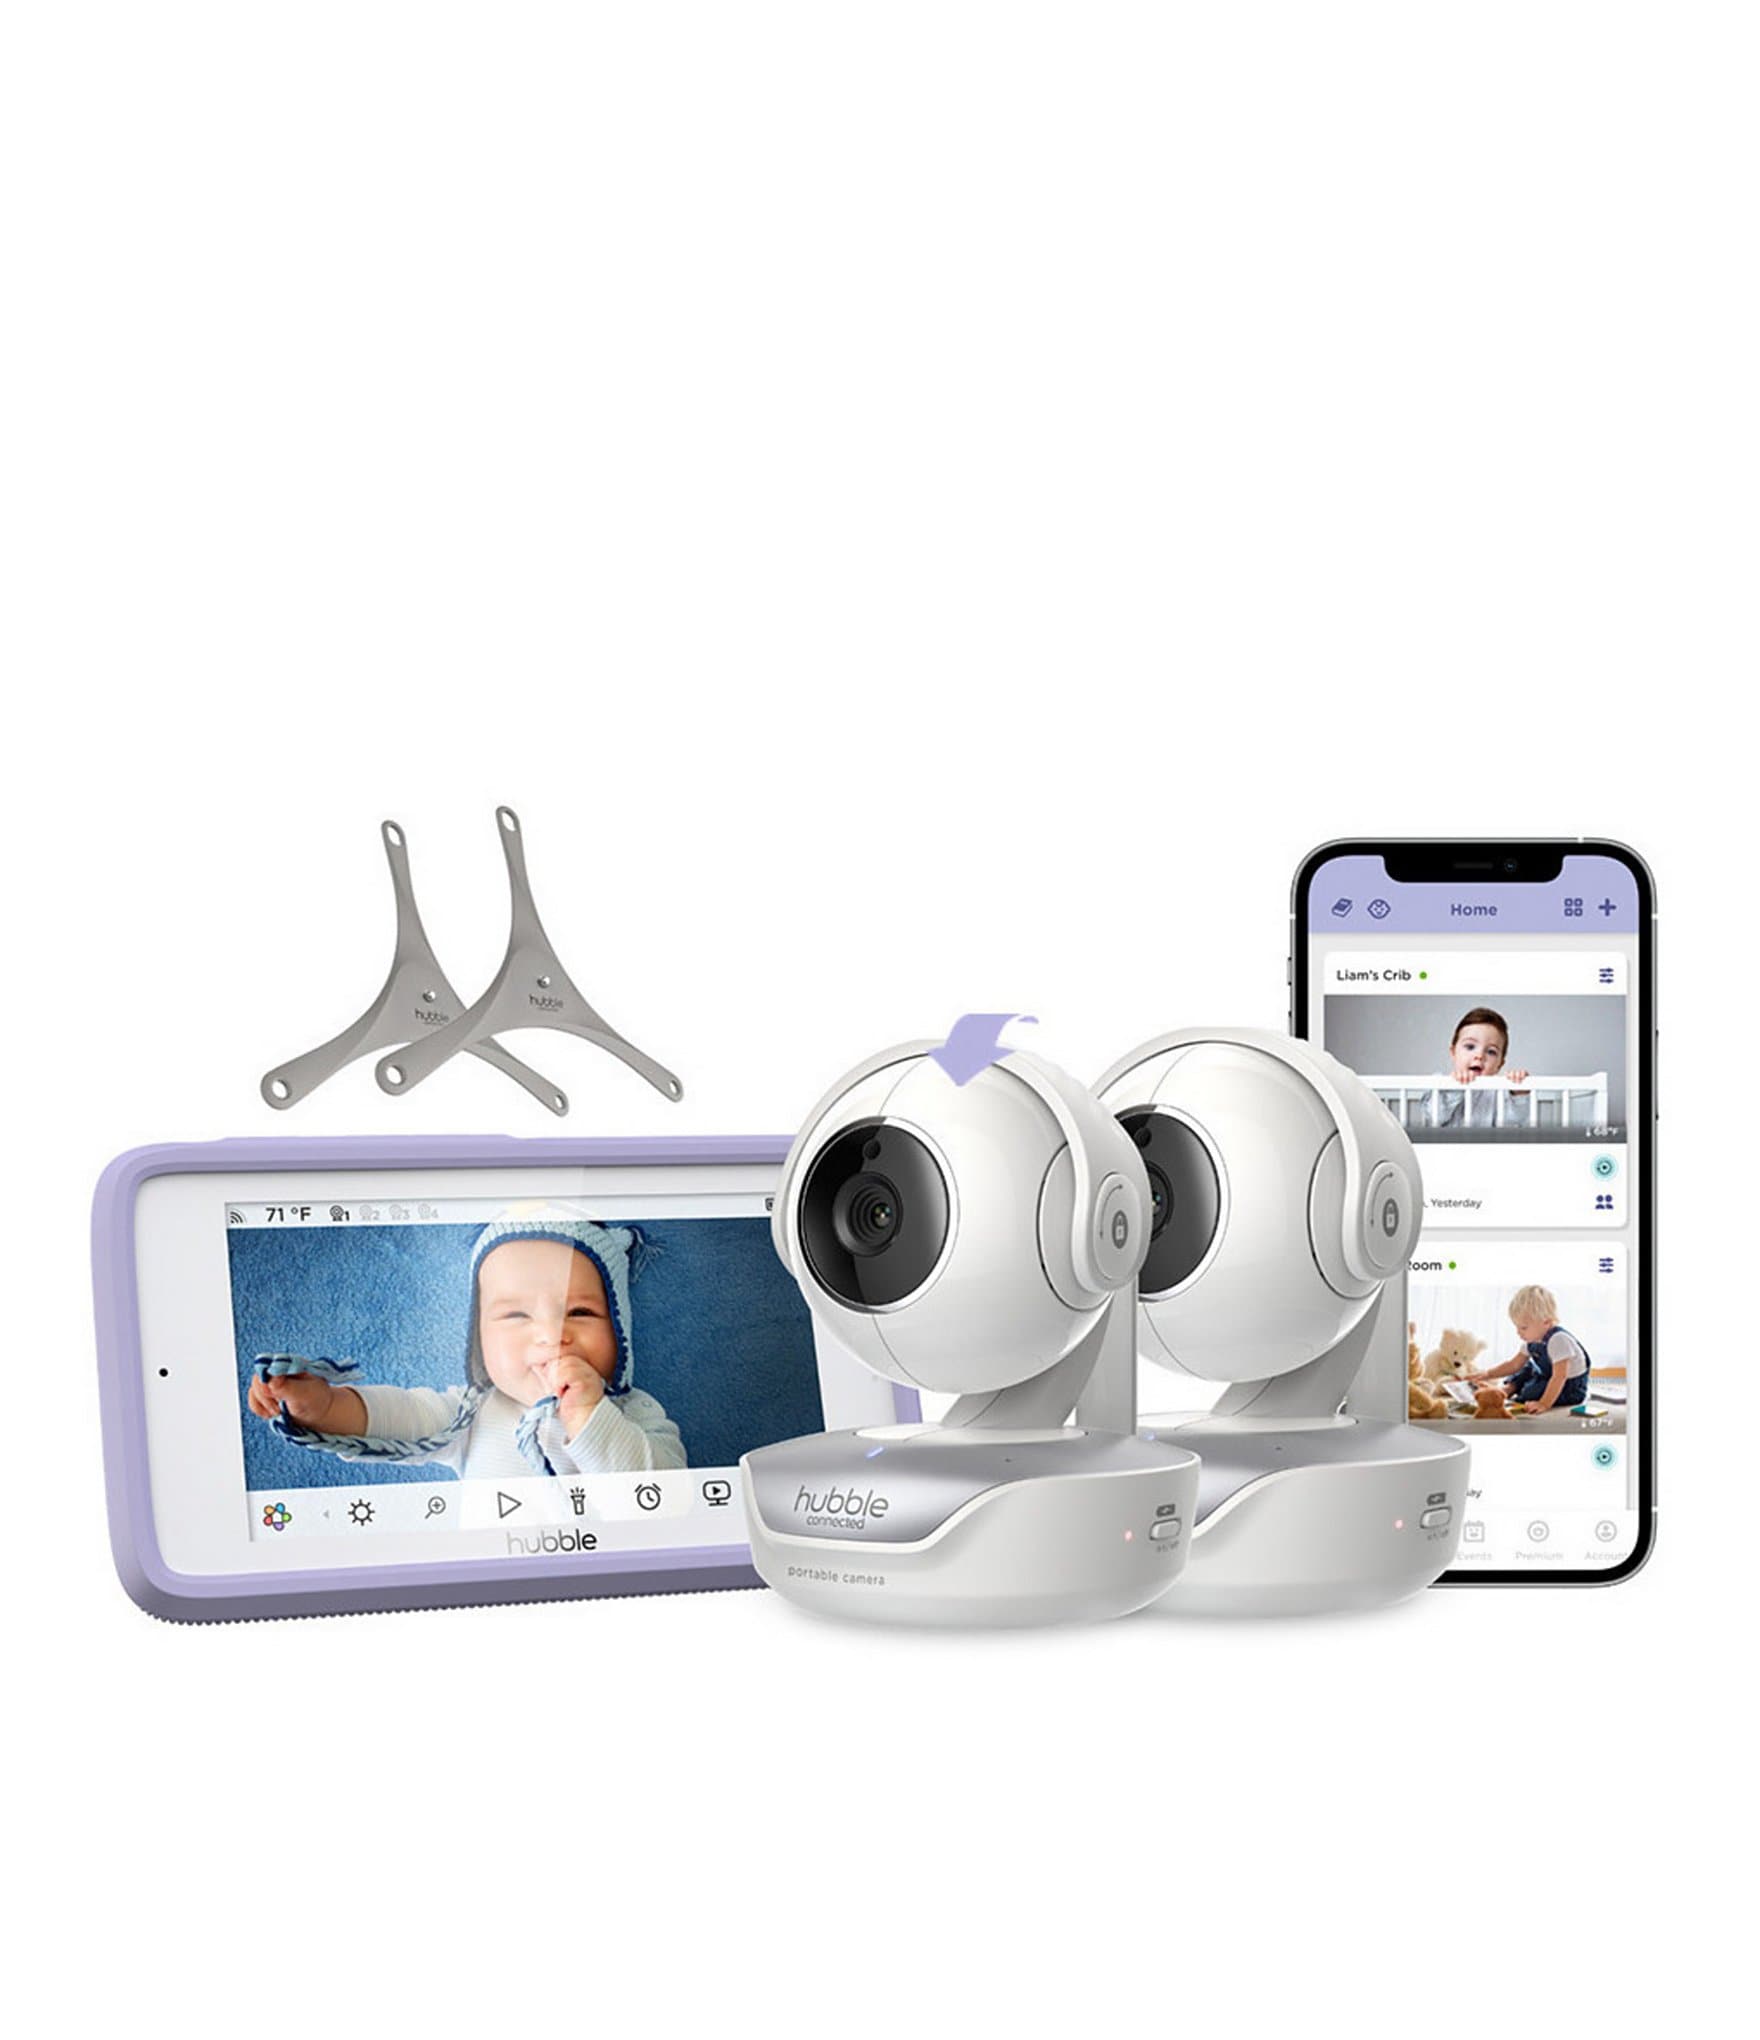 petroleum Forkert Kælder Hubble Connected Nursery Pal Deluxe Twin Baby Monitor - 2 Camera Pack |  Dillard's